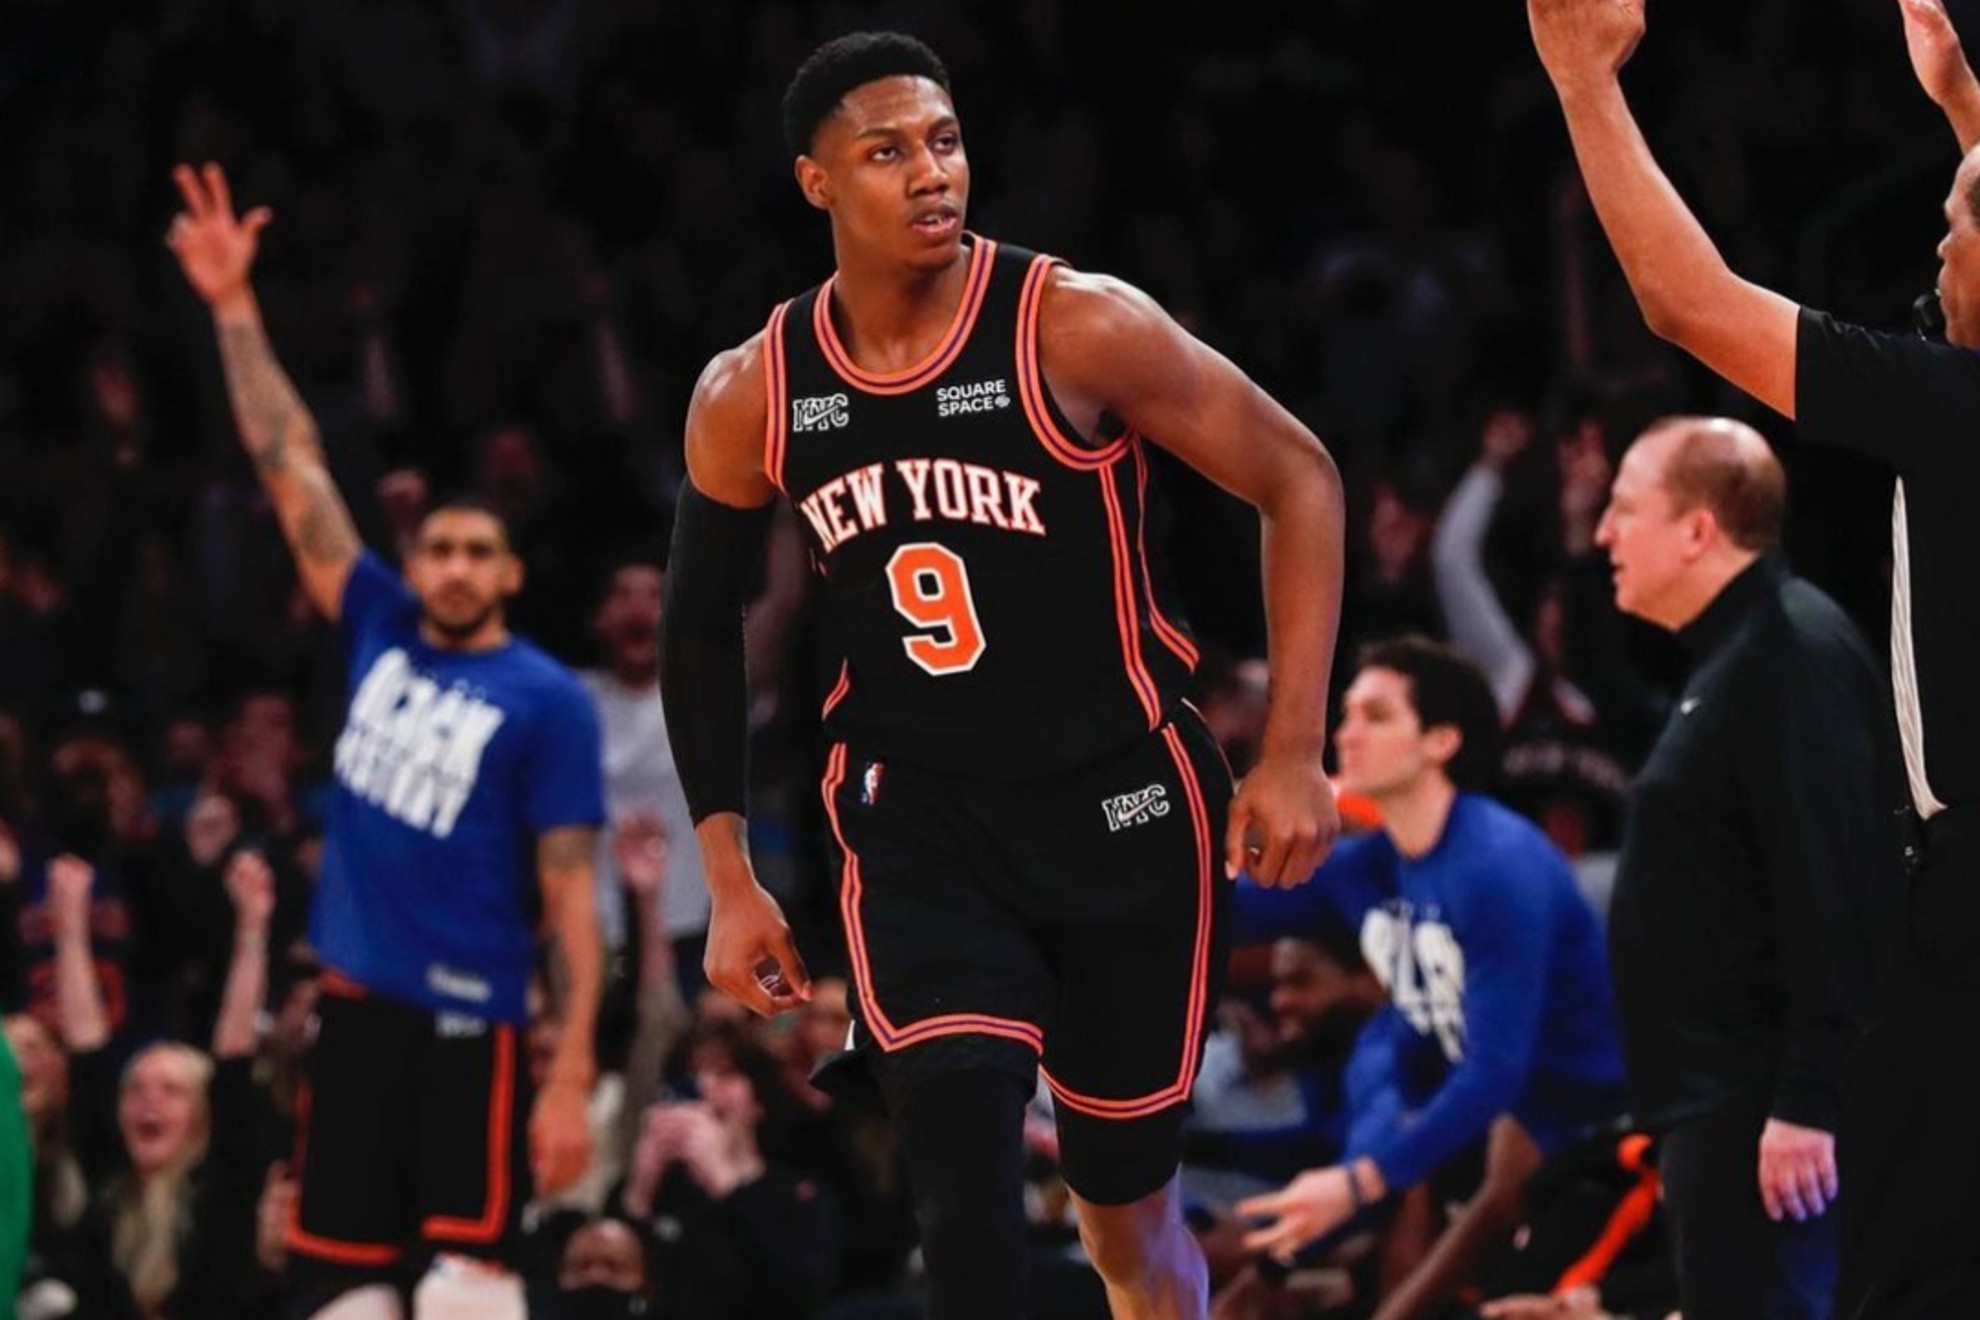 RJ Barrett: I'm honoured and blessed to be at the New York Knicks